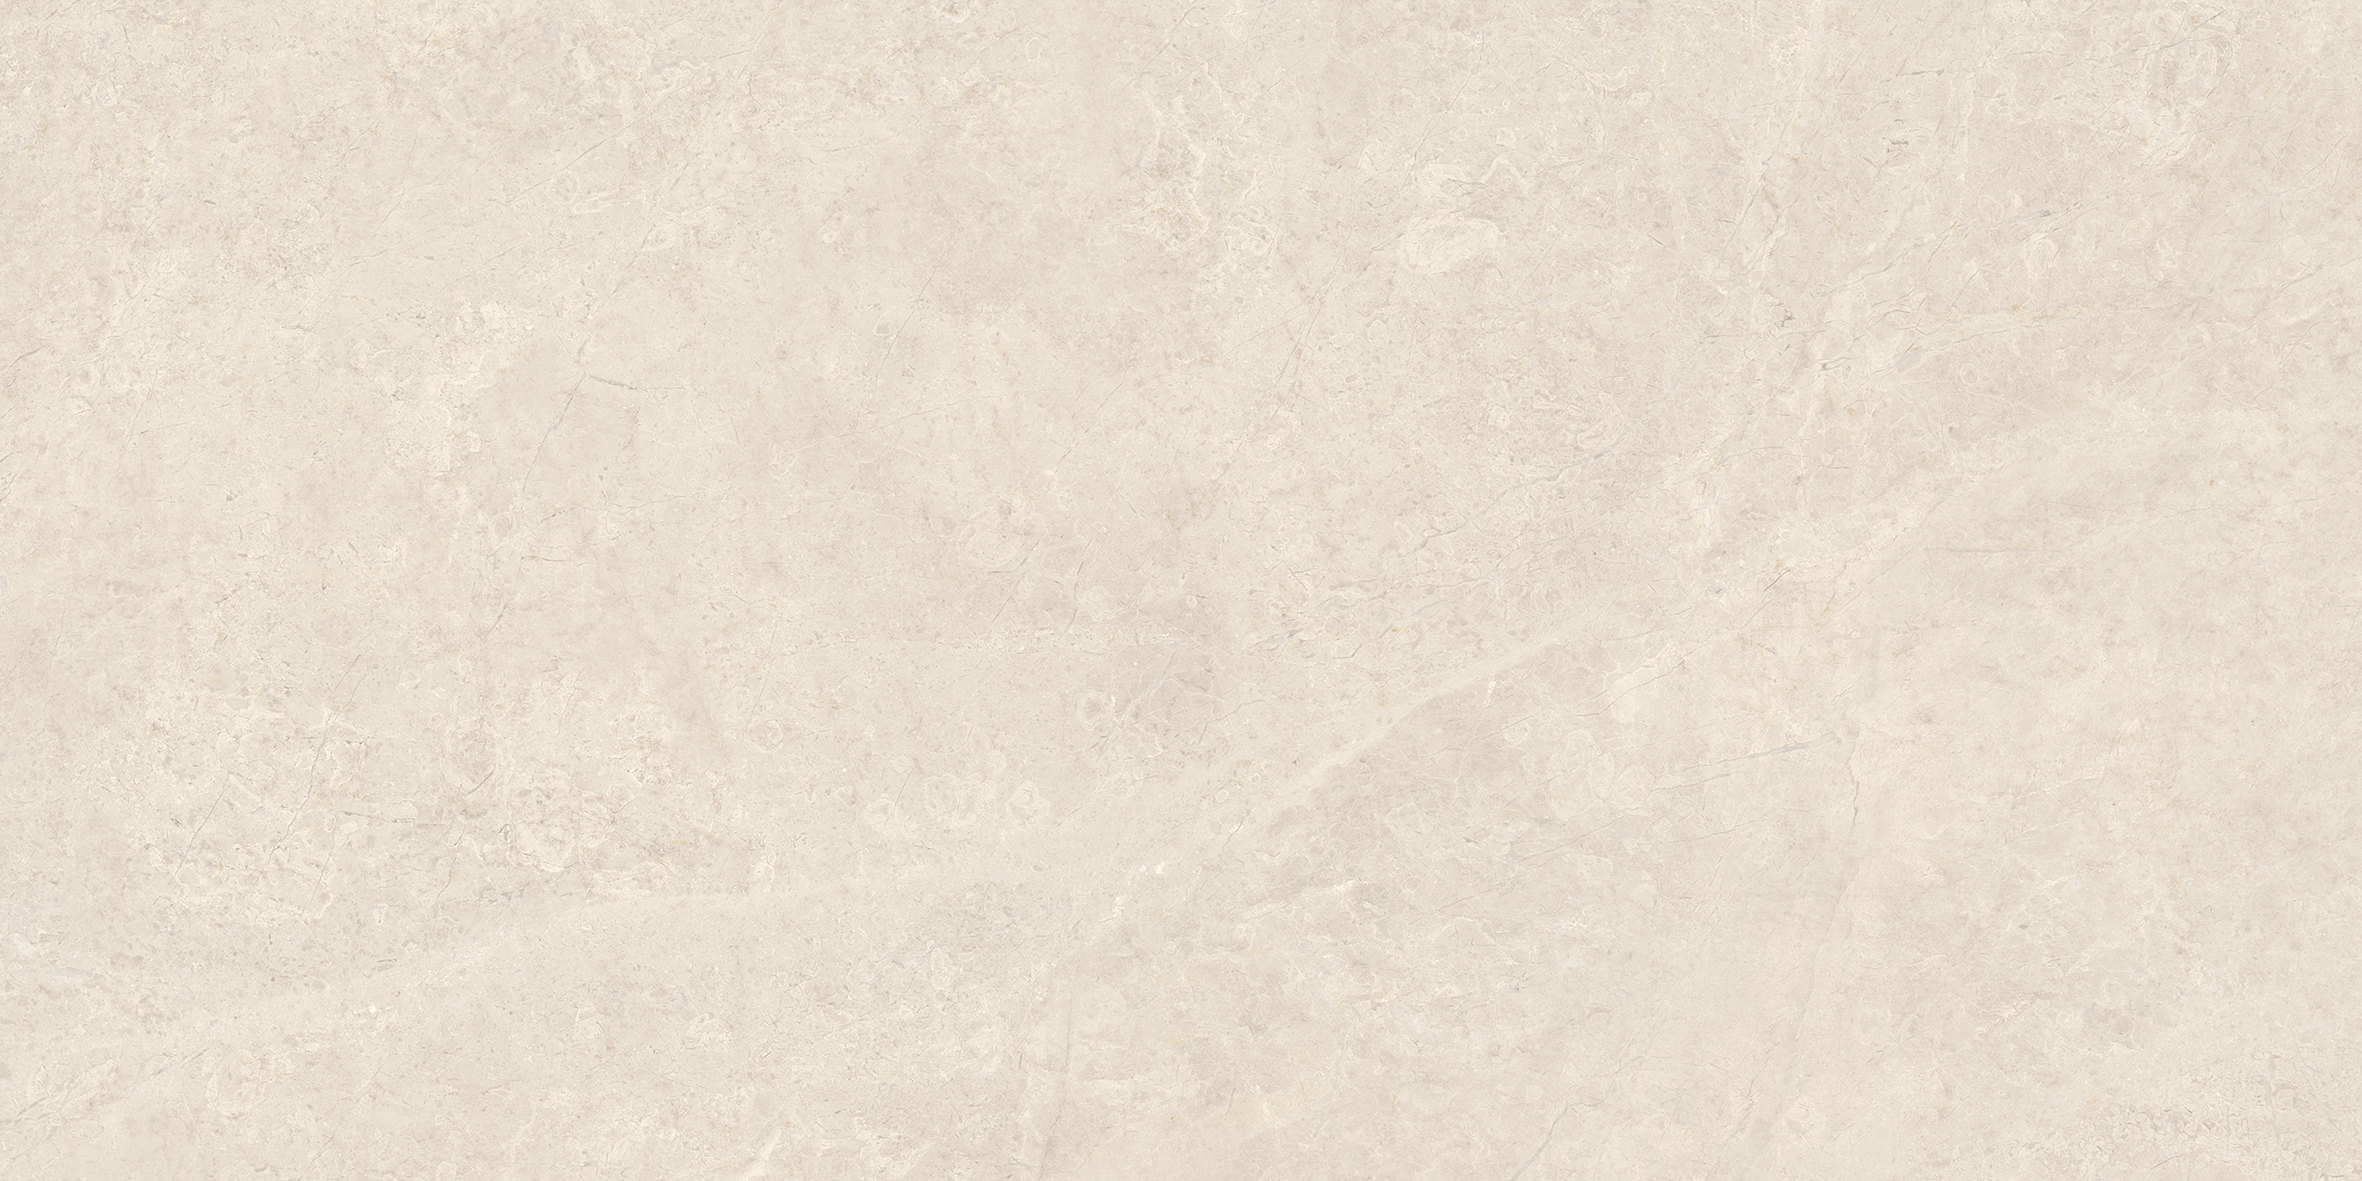 allure ivory pattern glazed porcelain field tile from mayfair anatolia collection distributed by surface group international matte finish rectified edge 12x24 rectangle shape